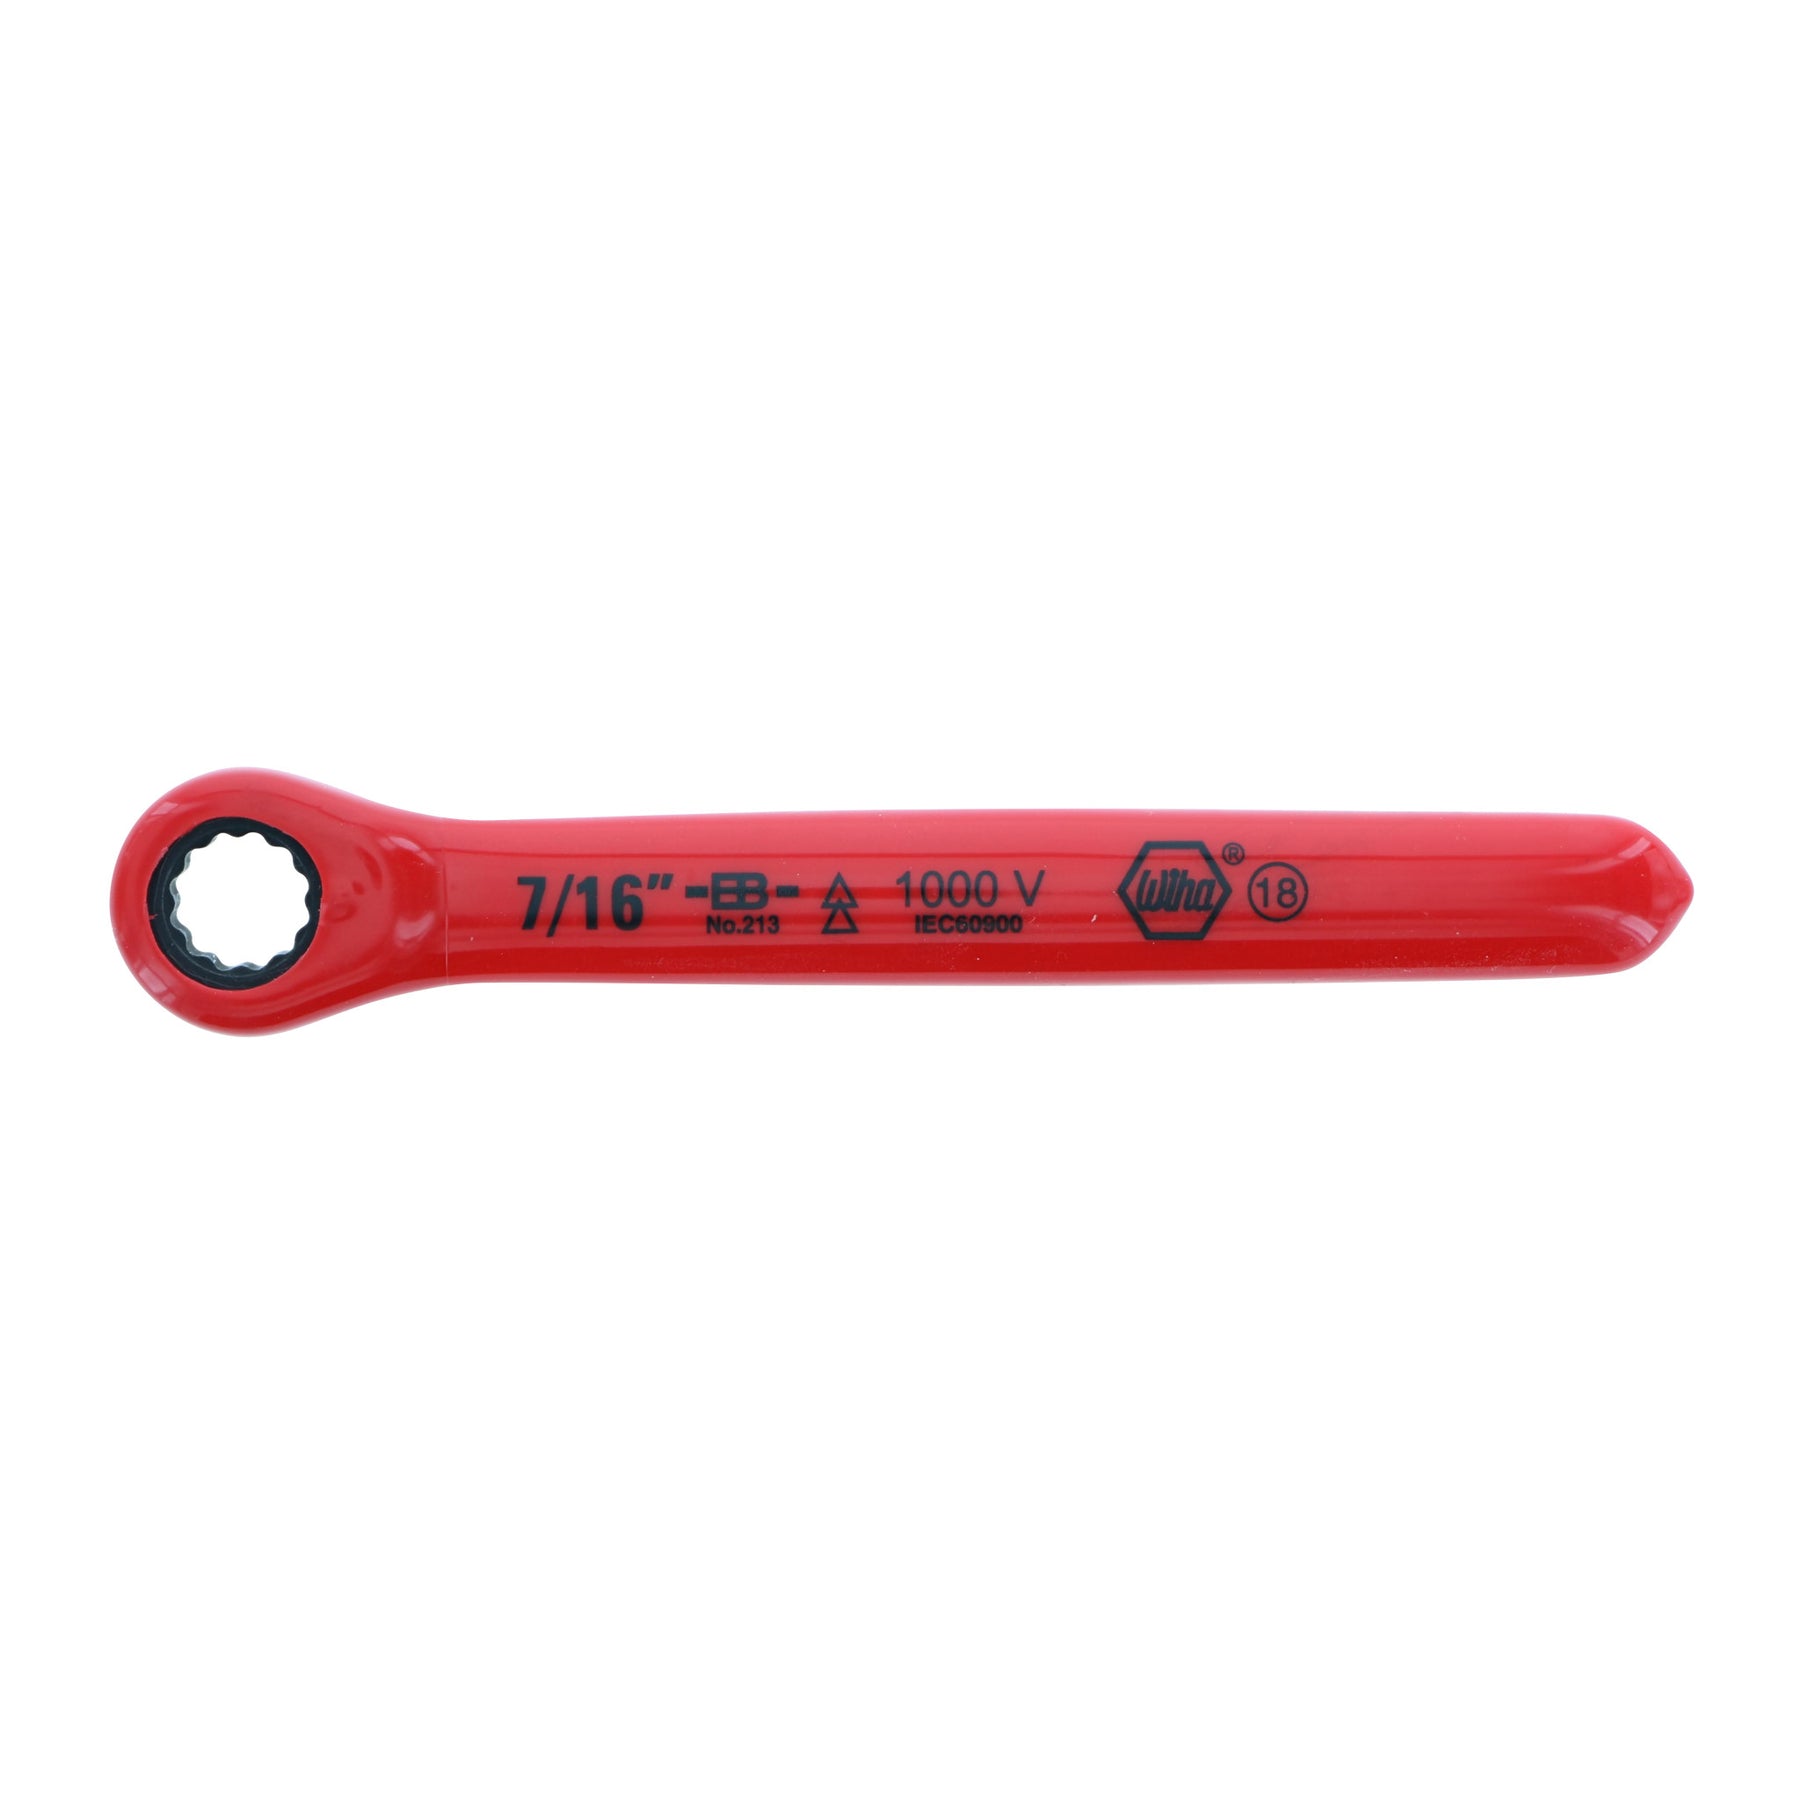 Insulated Ratchet Wrench 7/16"